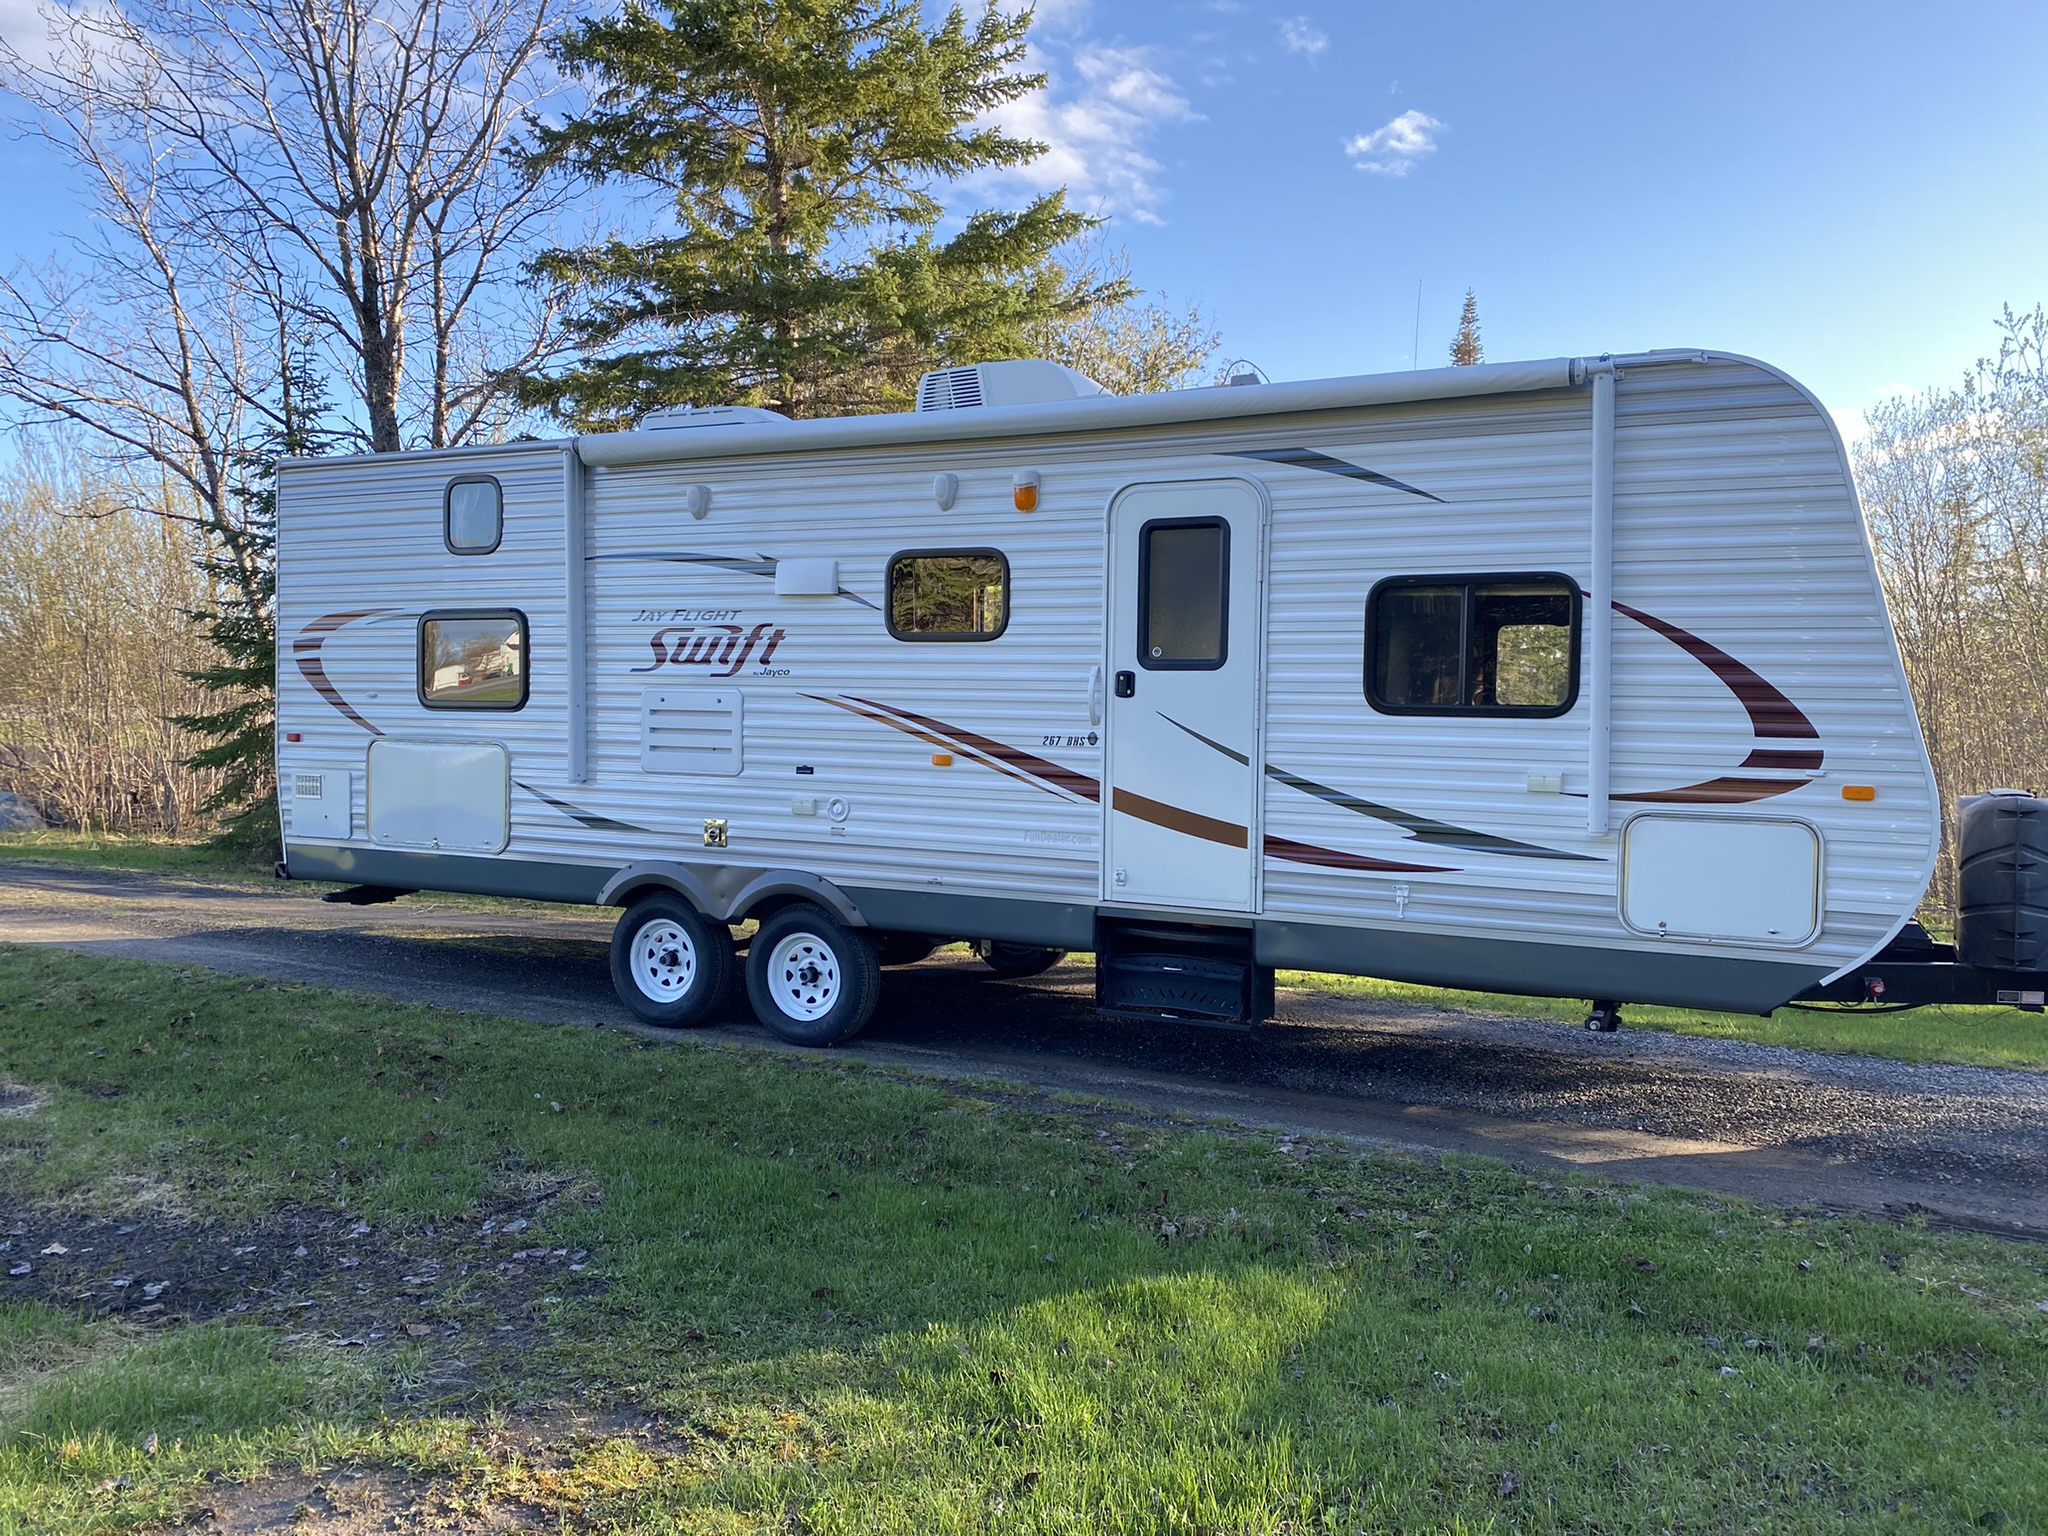 30' 1/2 ton towable with sleeping for 8 | RVshare